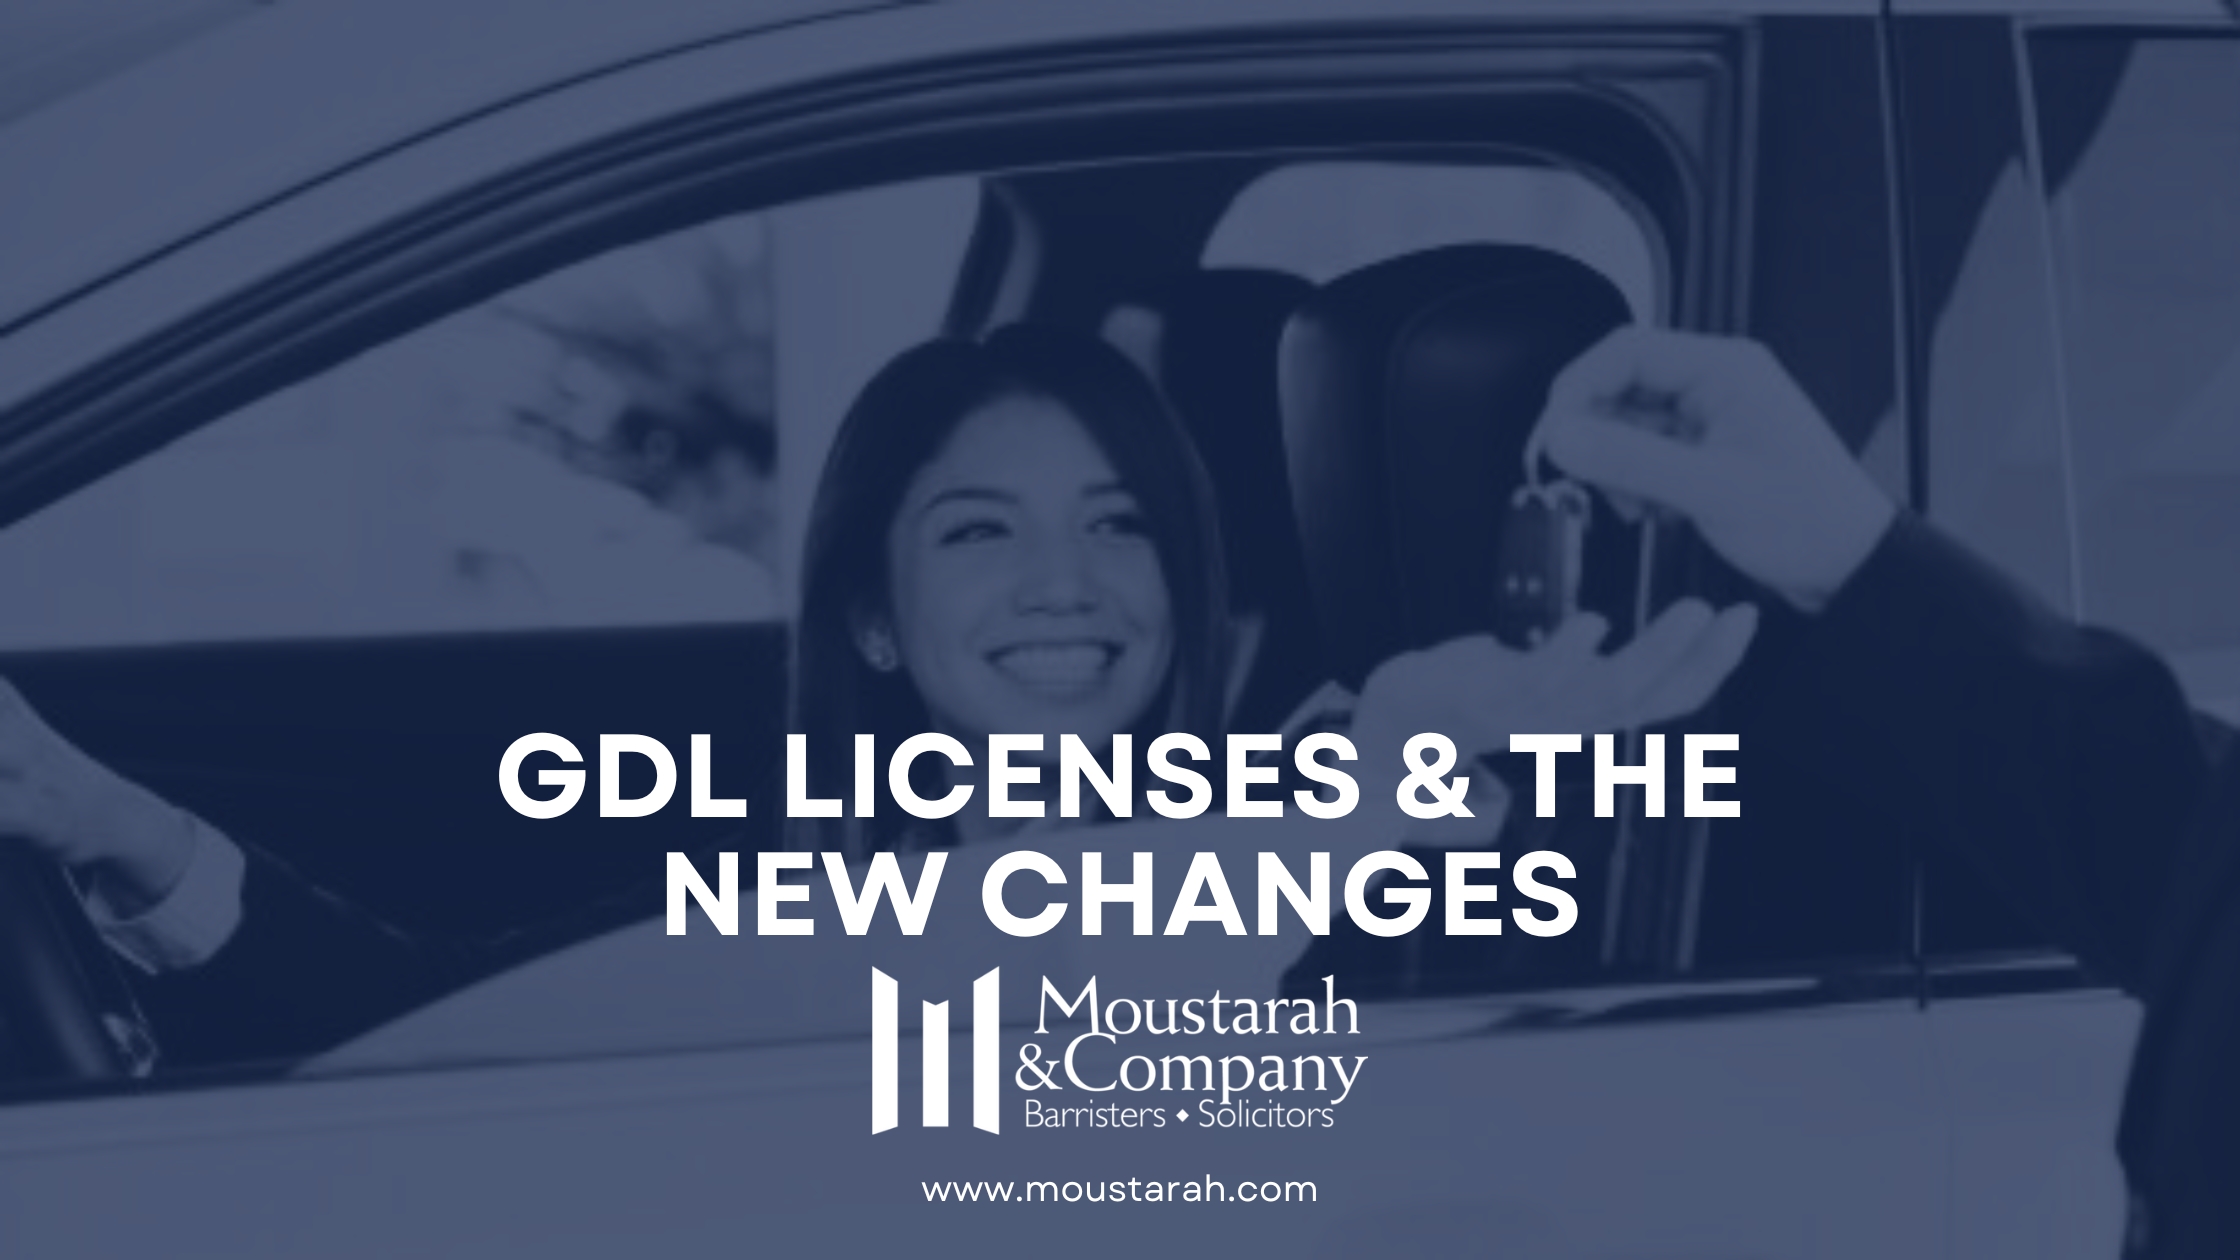 GDL licenses & the new changes